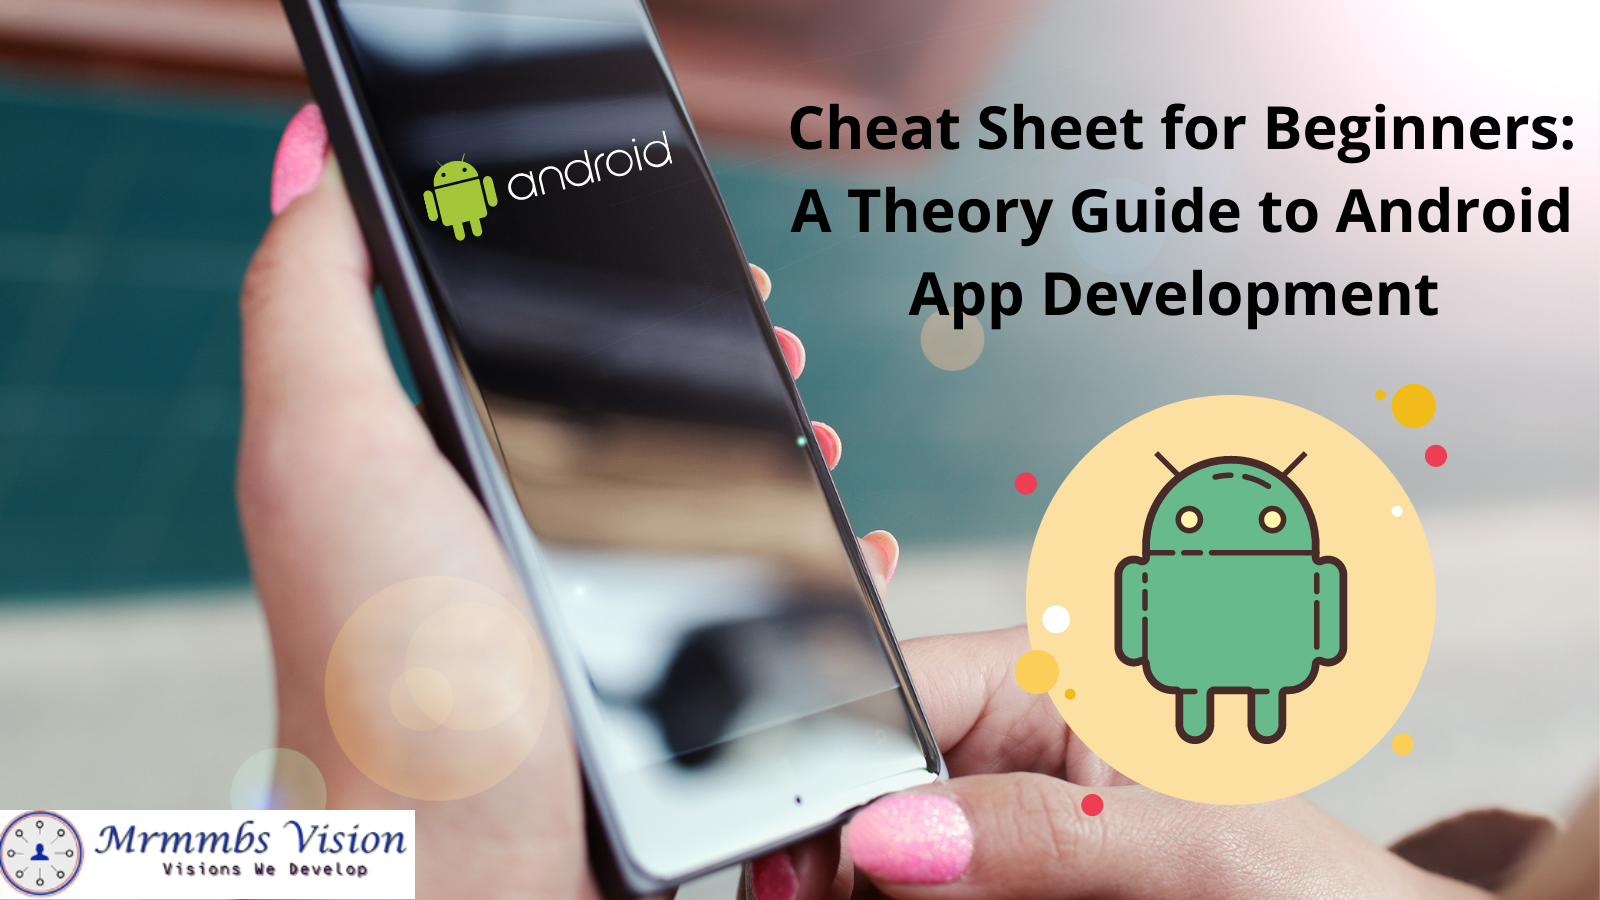 Cheat Sheet for Beginners: A Theory Guide to Android App Development               